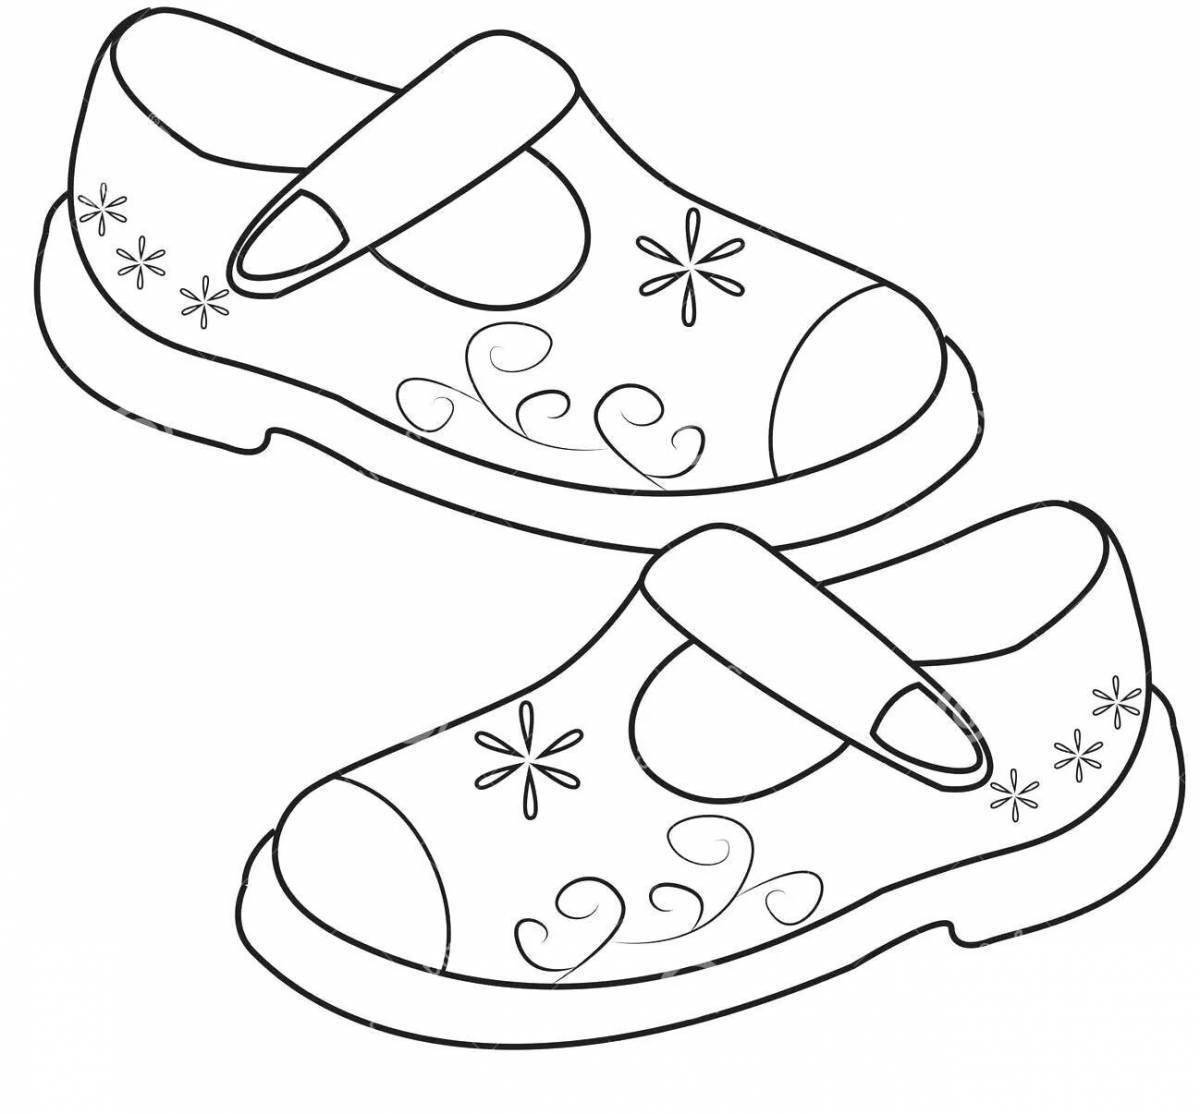 Playful shoe coloring page for 5-6 year olds